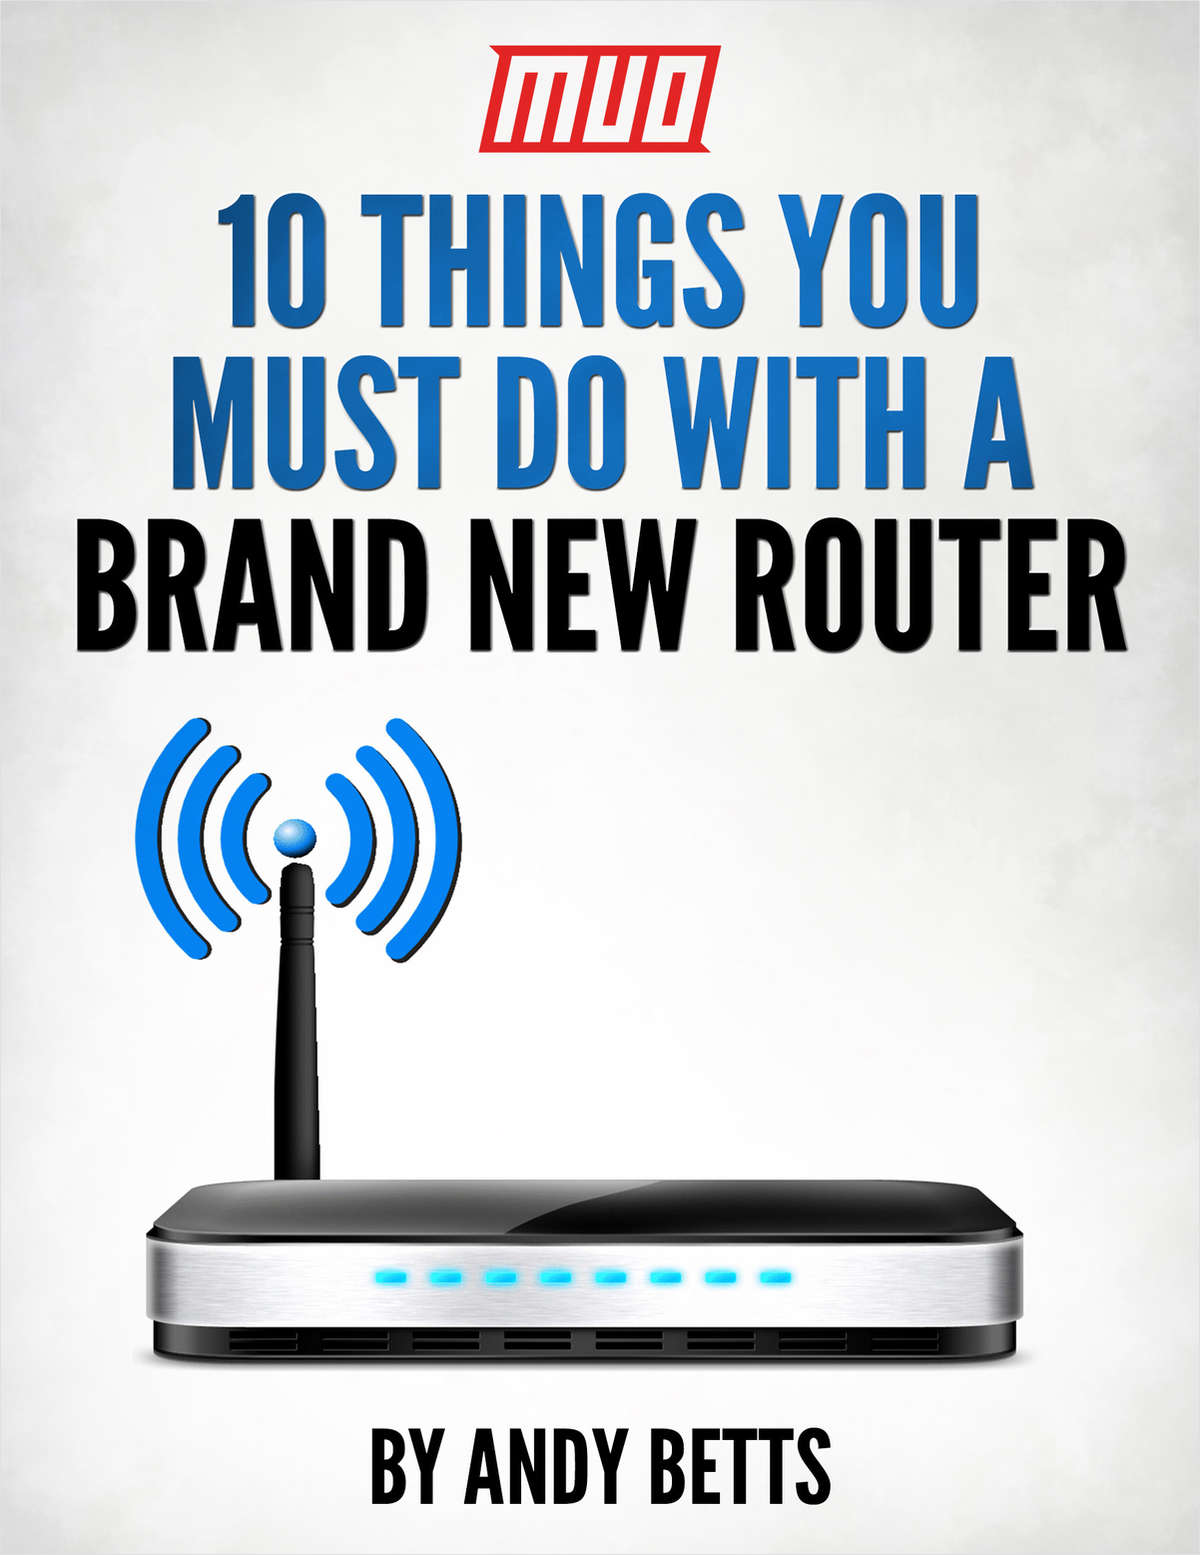 10 Things You Must Do With a Brand New Router